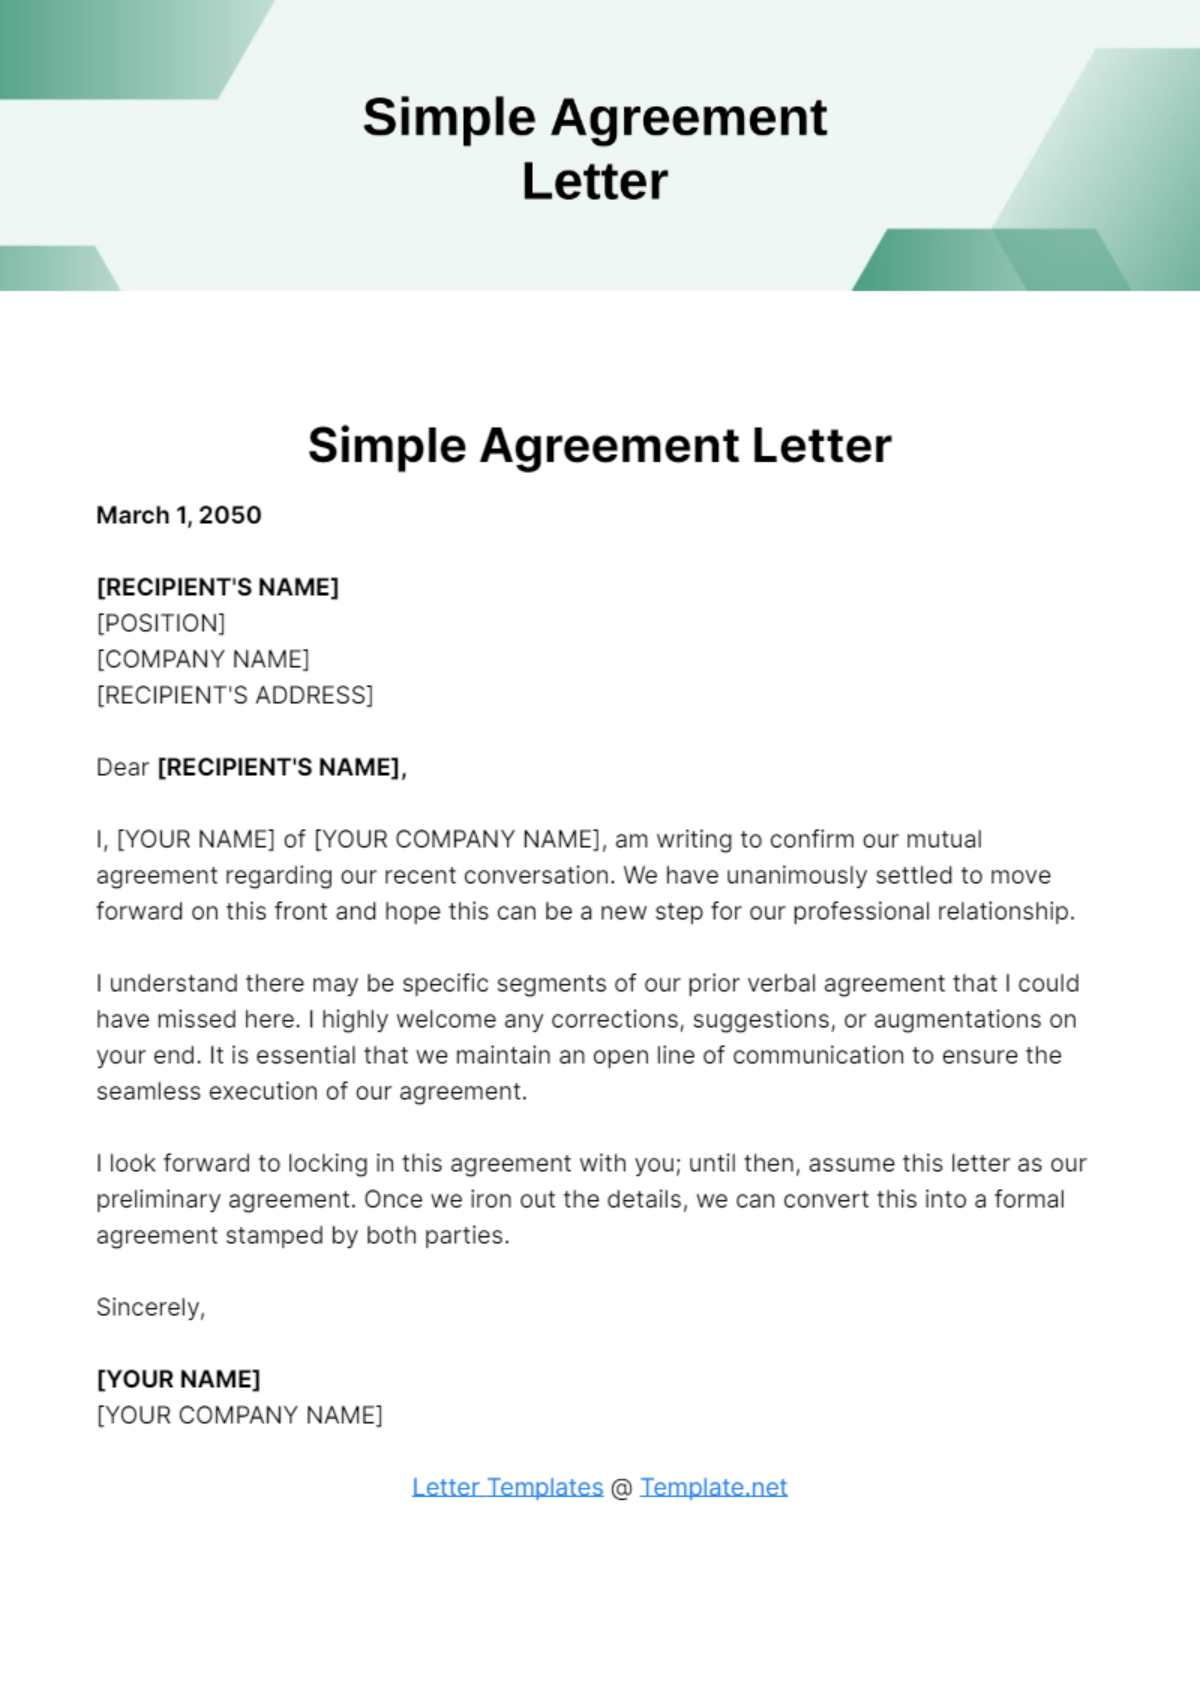 Free Simple Agreement Letter Template